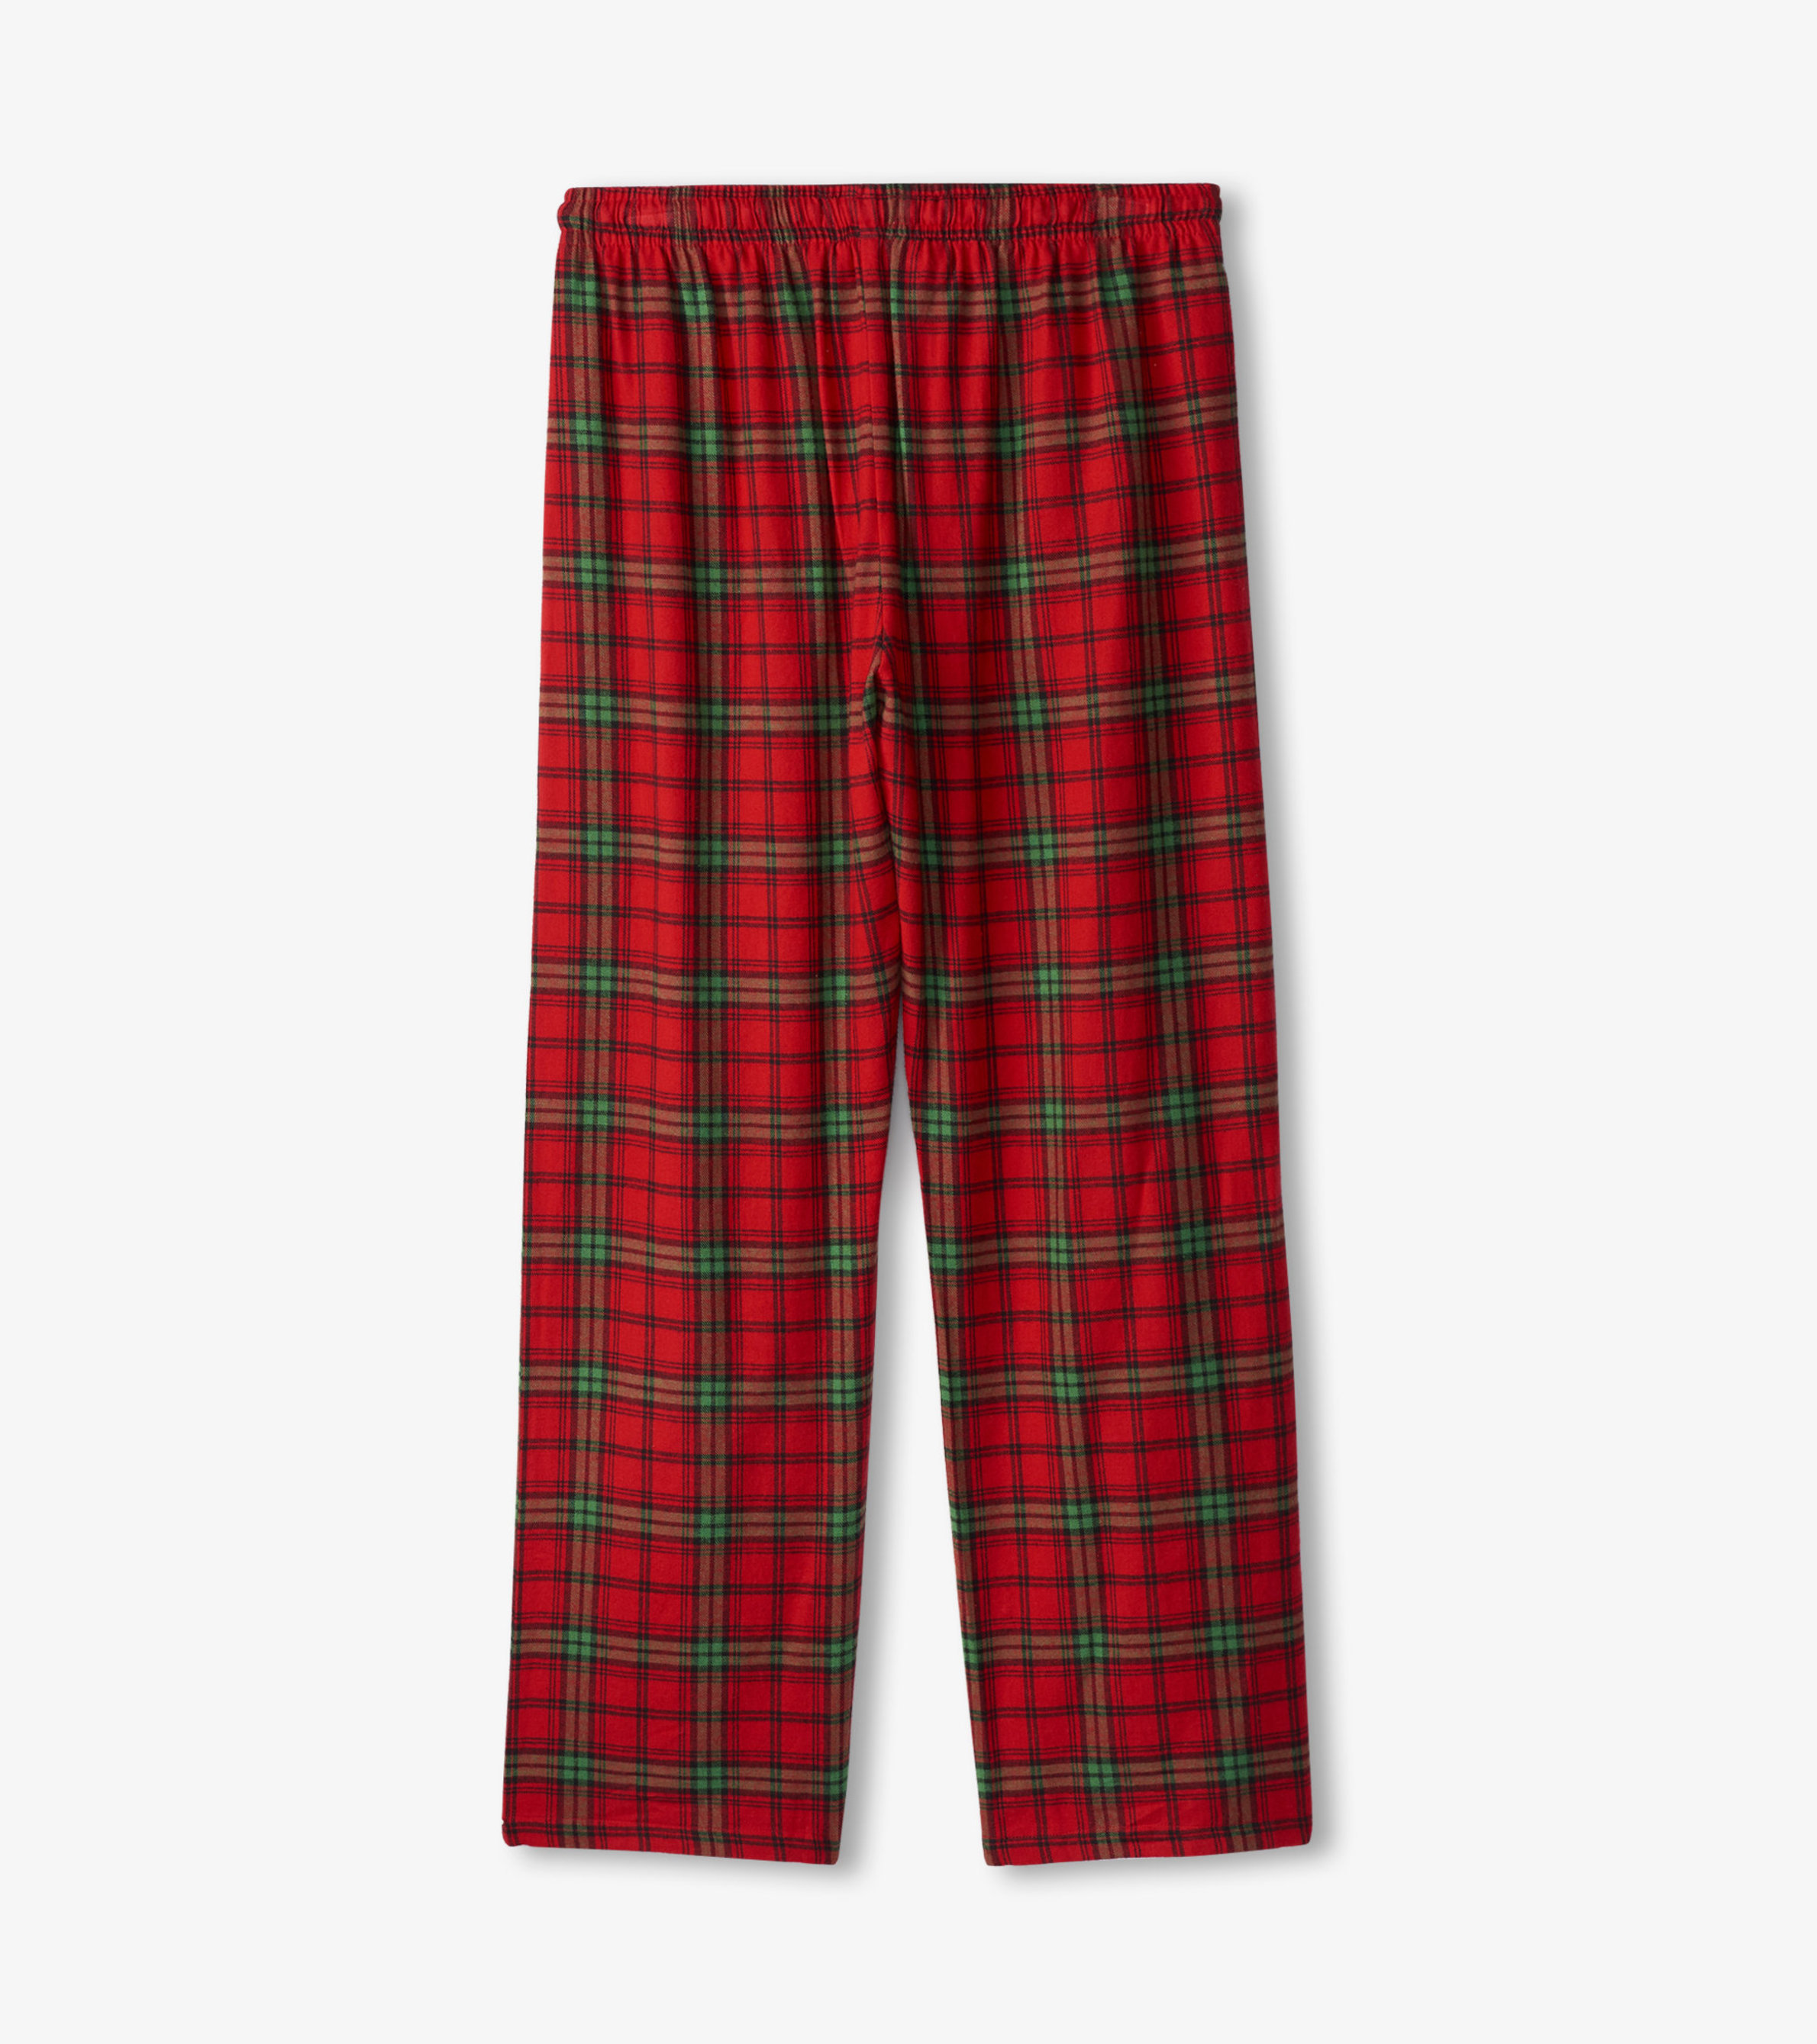 Sale Men's Holiday Red Plaid Classic Sleep Pant